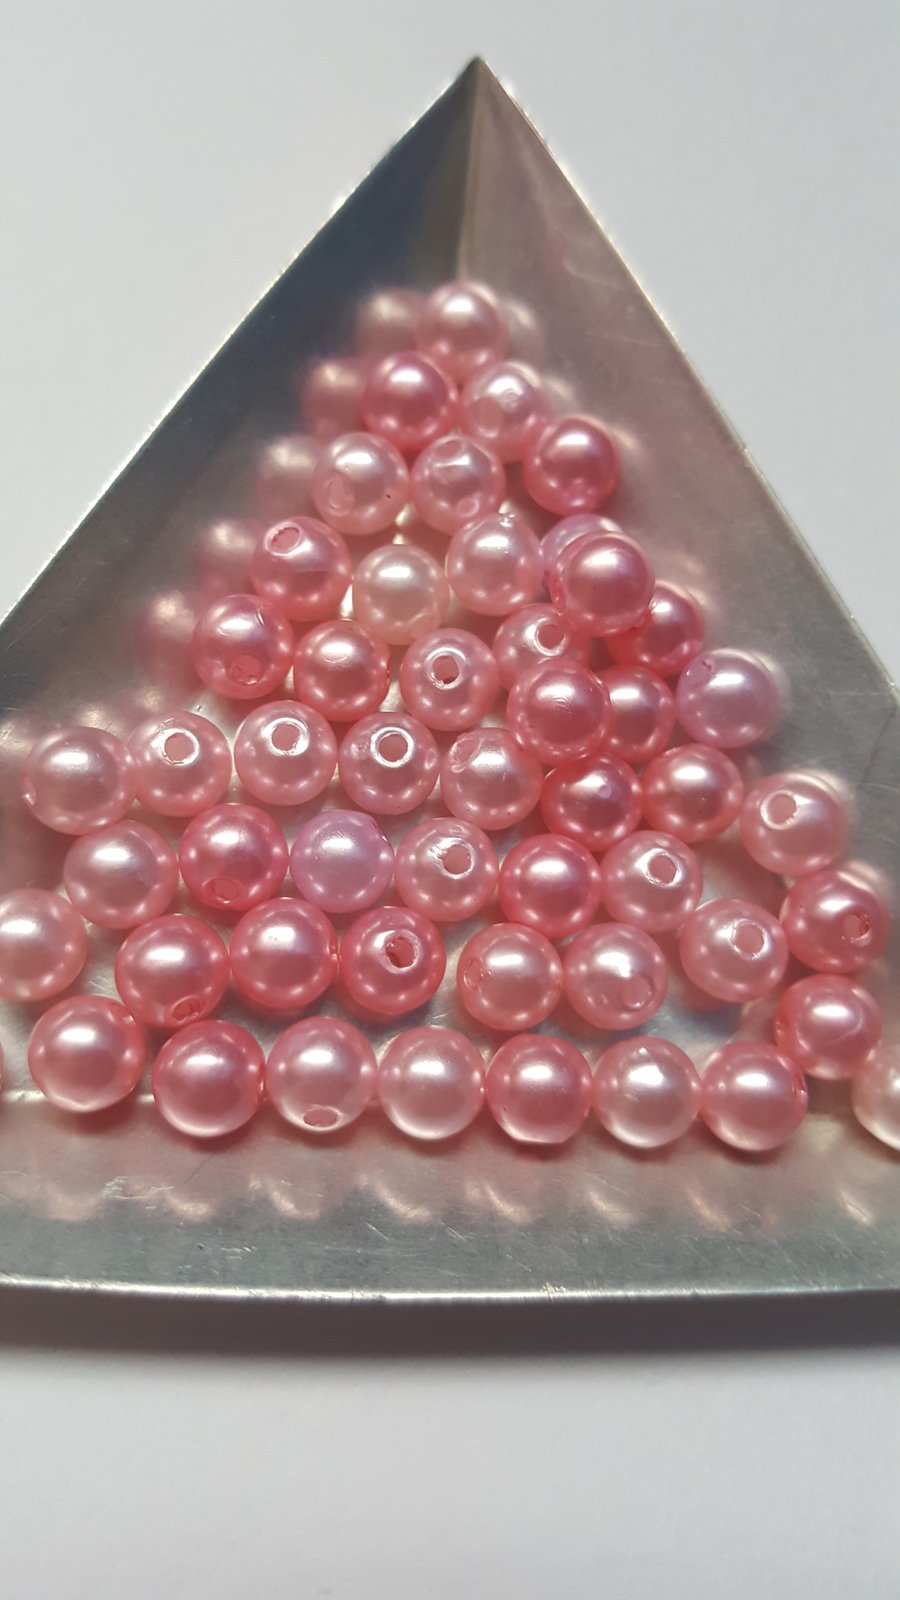 50 x Acrylic Pearl Beads - Round - 6mm - Pale Pinks Mix 